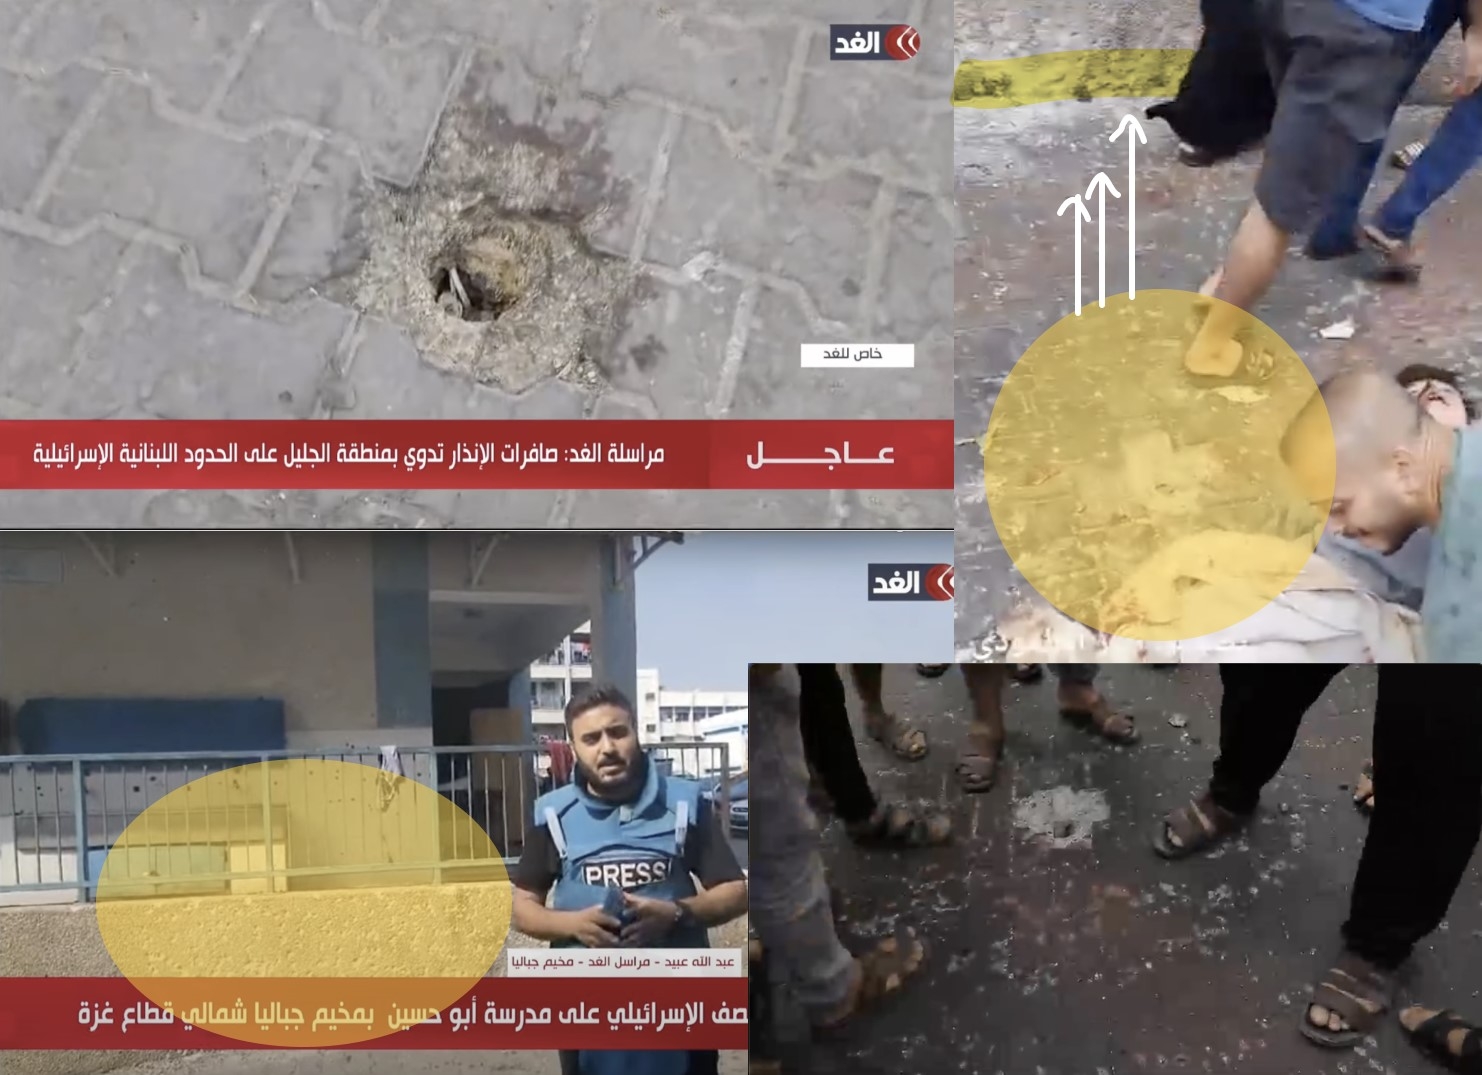 A screenshot from a video showing the hole in the ground formed by a projectile, alongside stills from video news broadcasts.